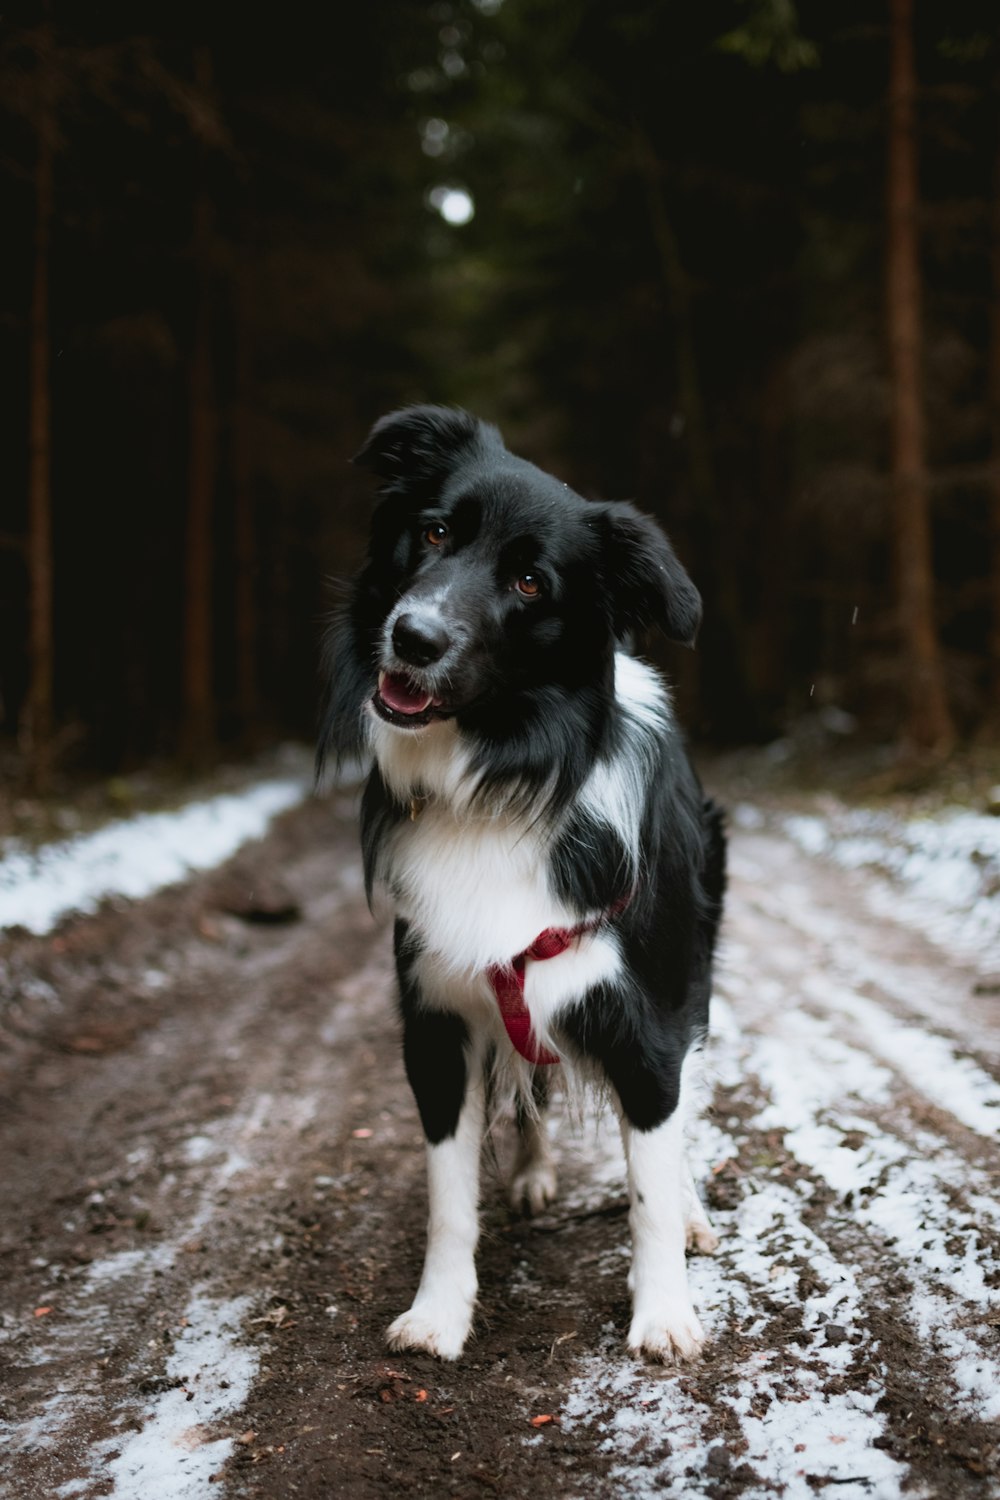 black and white dog standing on soil with snows